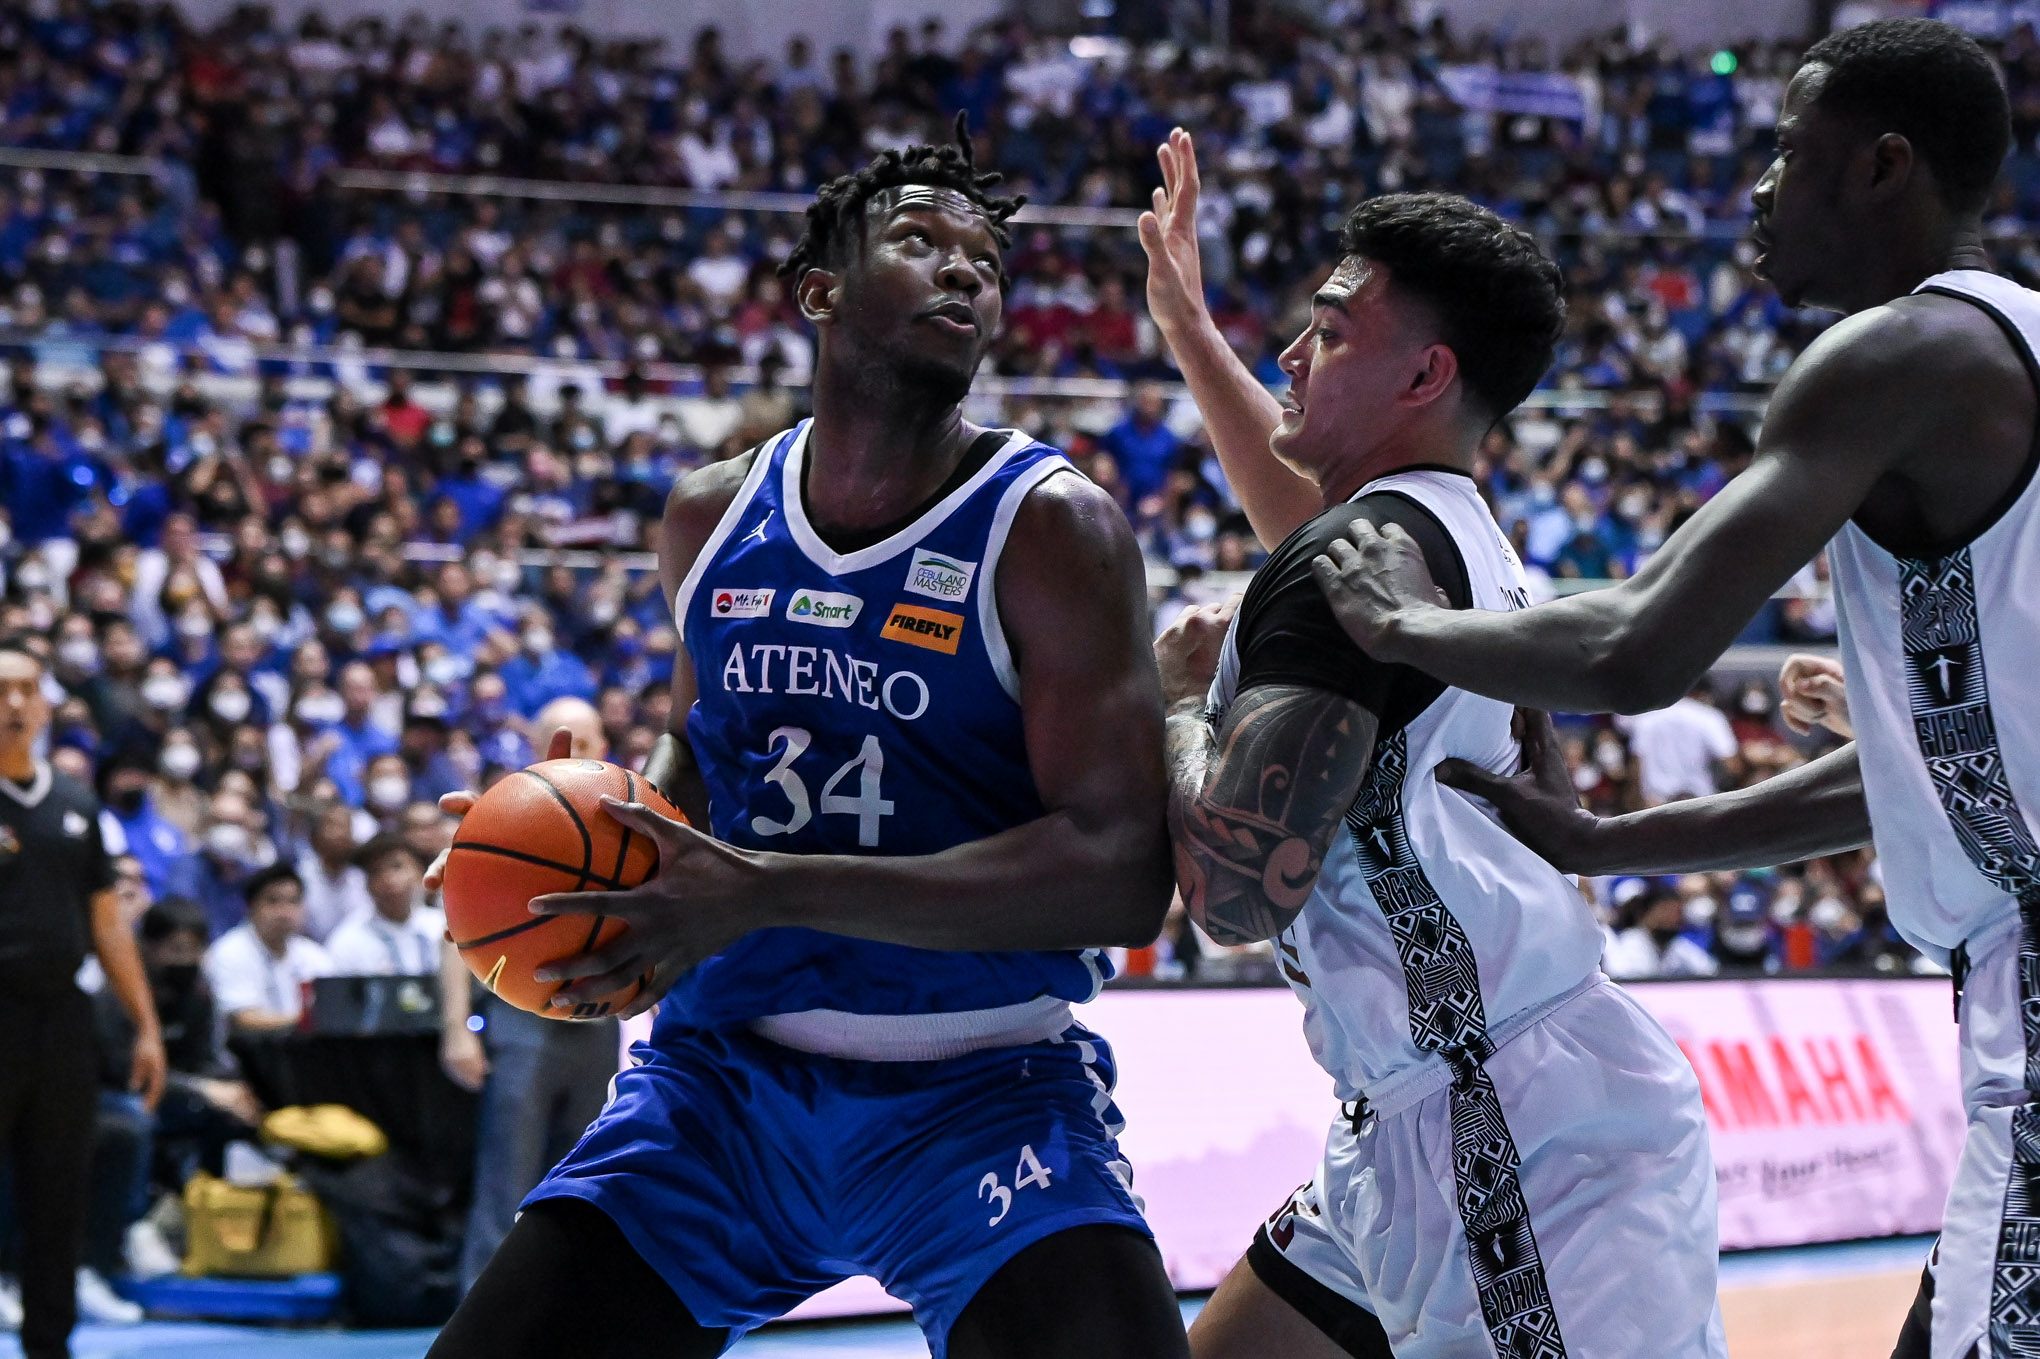 Ateneo reclaims lost glory, outguns UP in Game 3 to regain UAAP basketball title